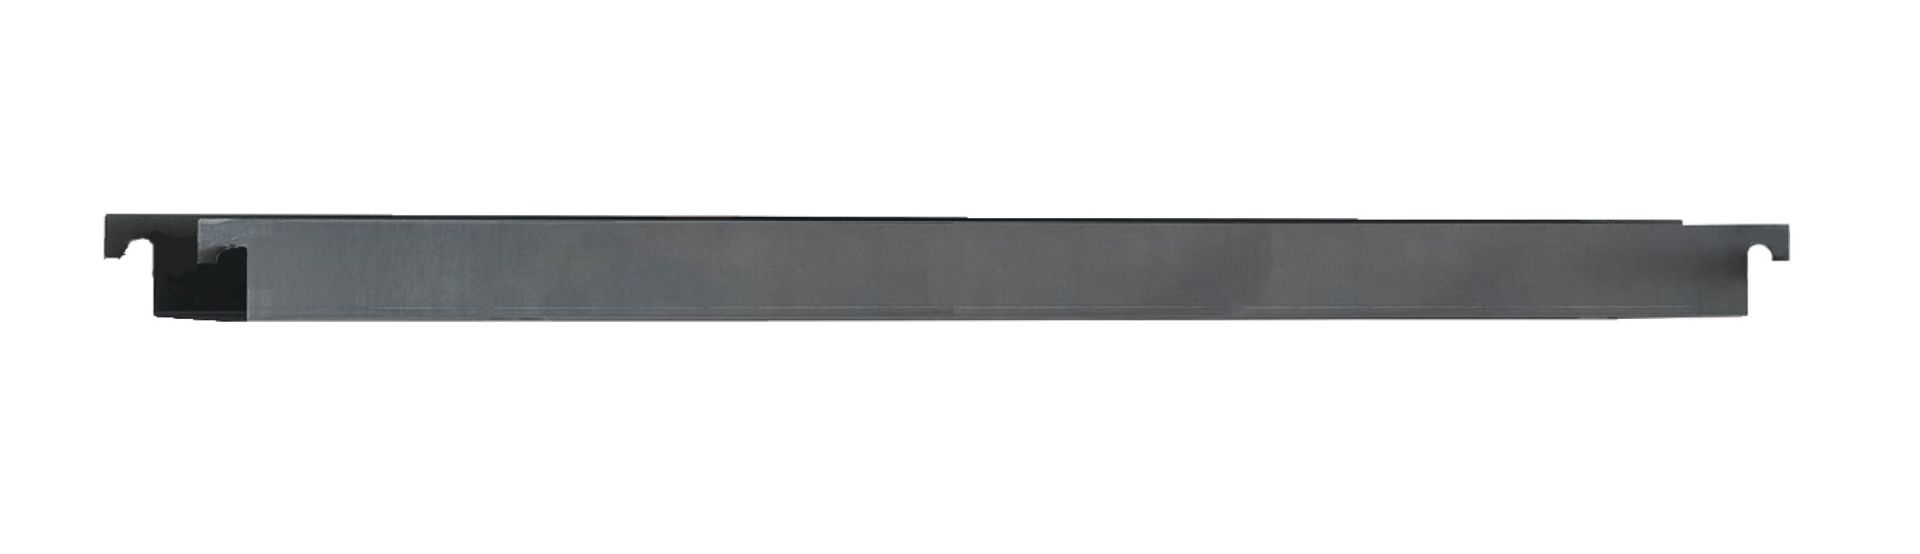 Cable tray for Eiermann 2 table frame 135 cm / COLOURLESS / STAINLESS STEEL Richard Lampert SINGLE PIECES